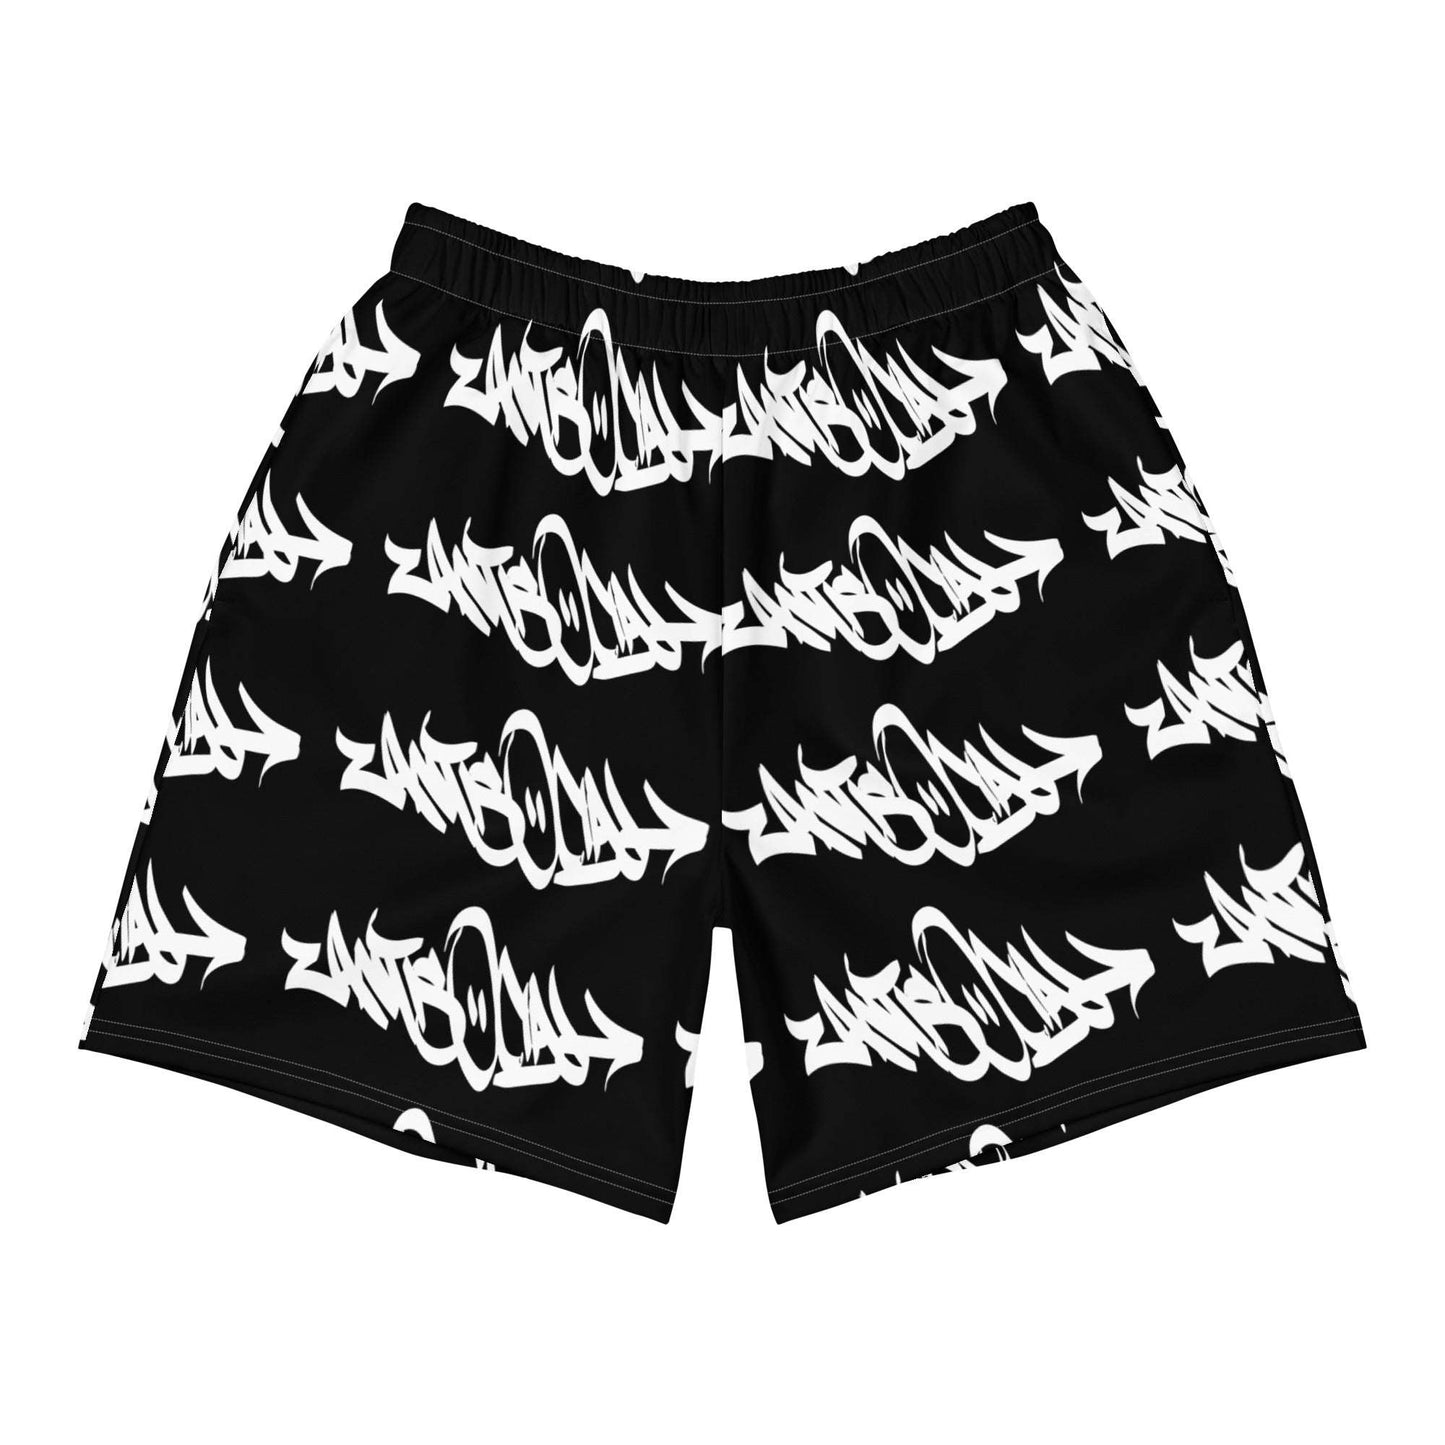 front of antisocial shorts black by B.Different Clothing independent streetwear inspired by street art graffiti